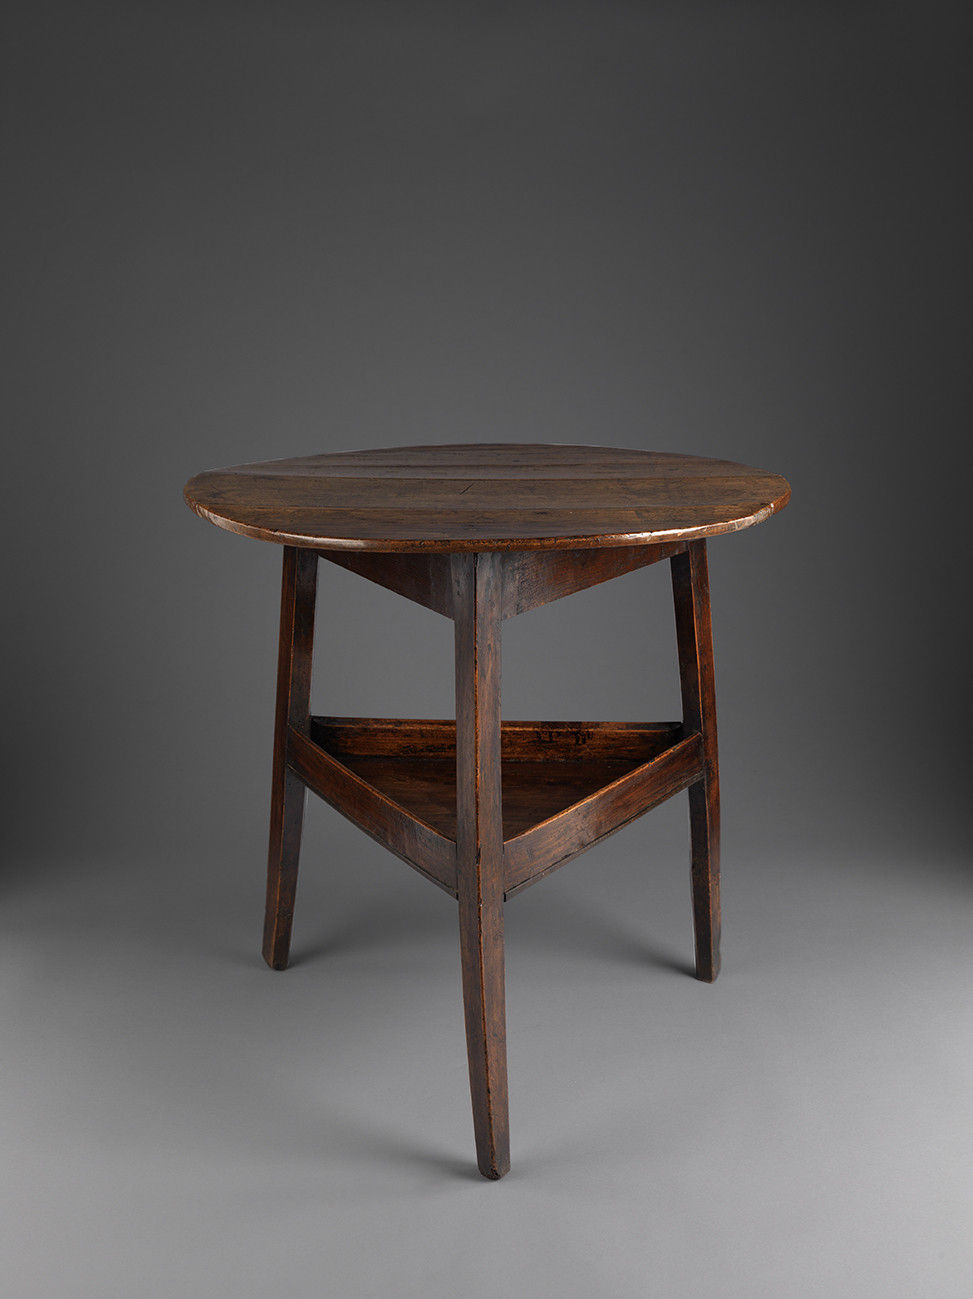 Classic Georgian Two Tier Cricket Table